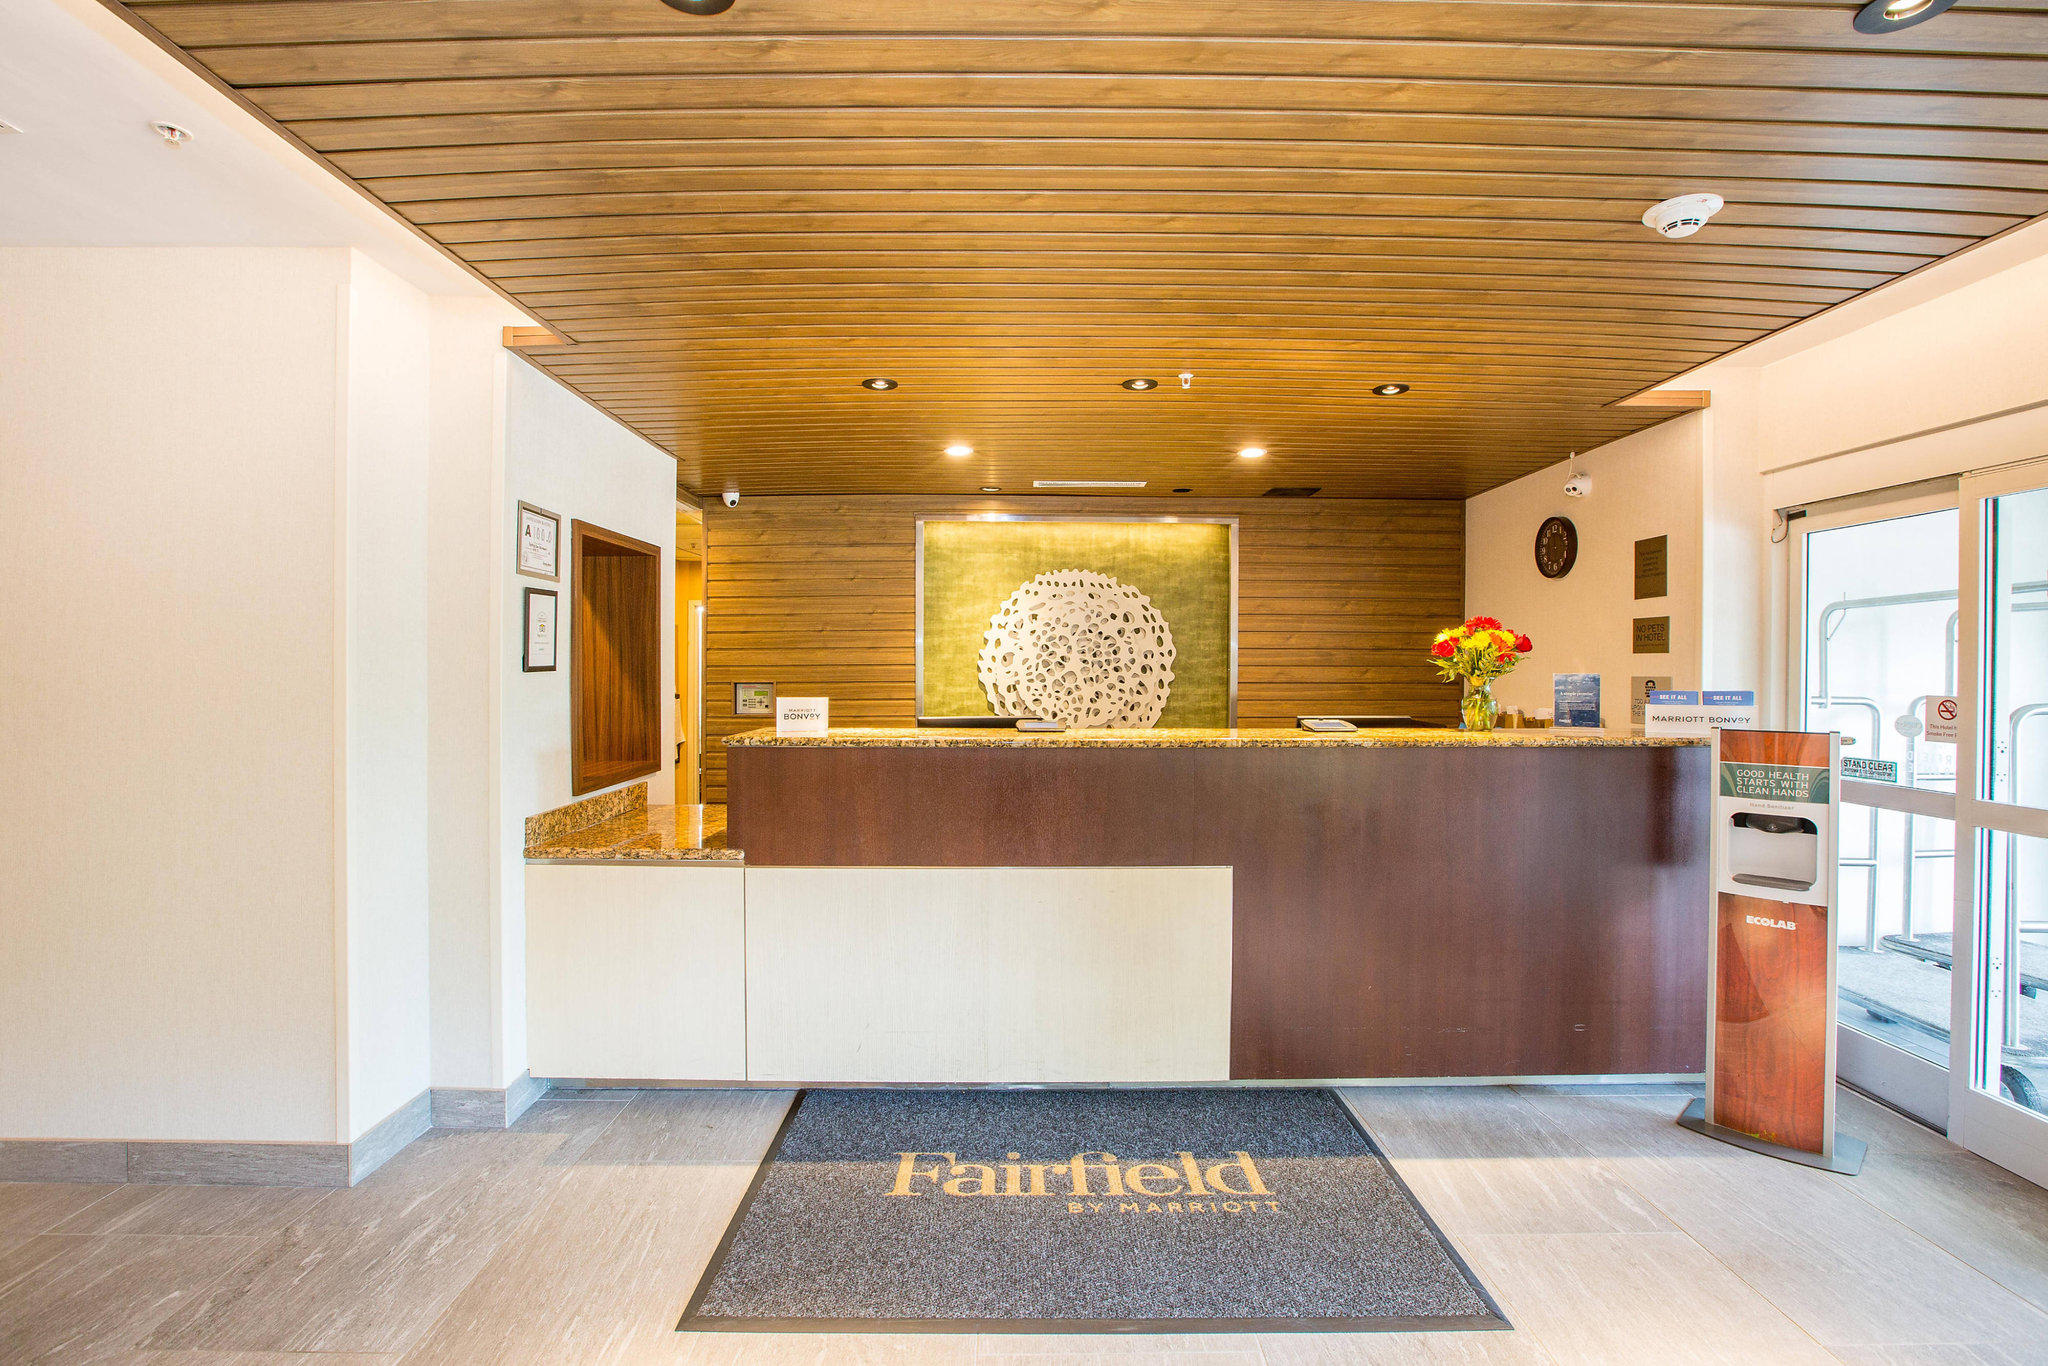 Fairfield Inn & Suites by Marriott Raleigh-Durham Airport/Research Triangle Park